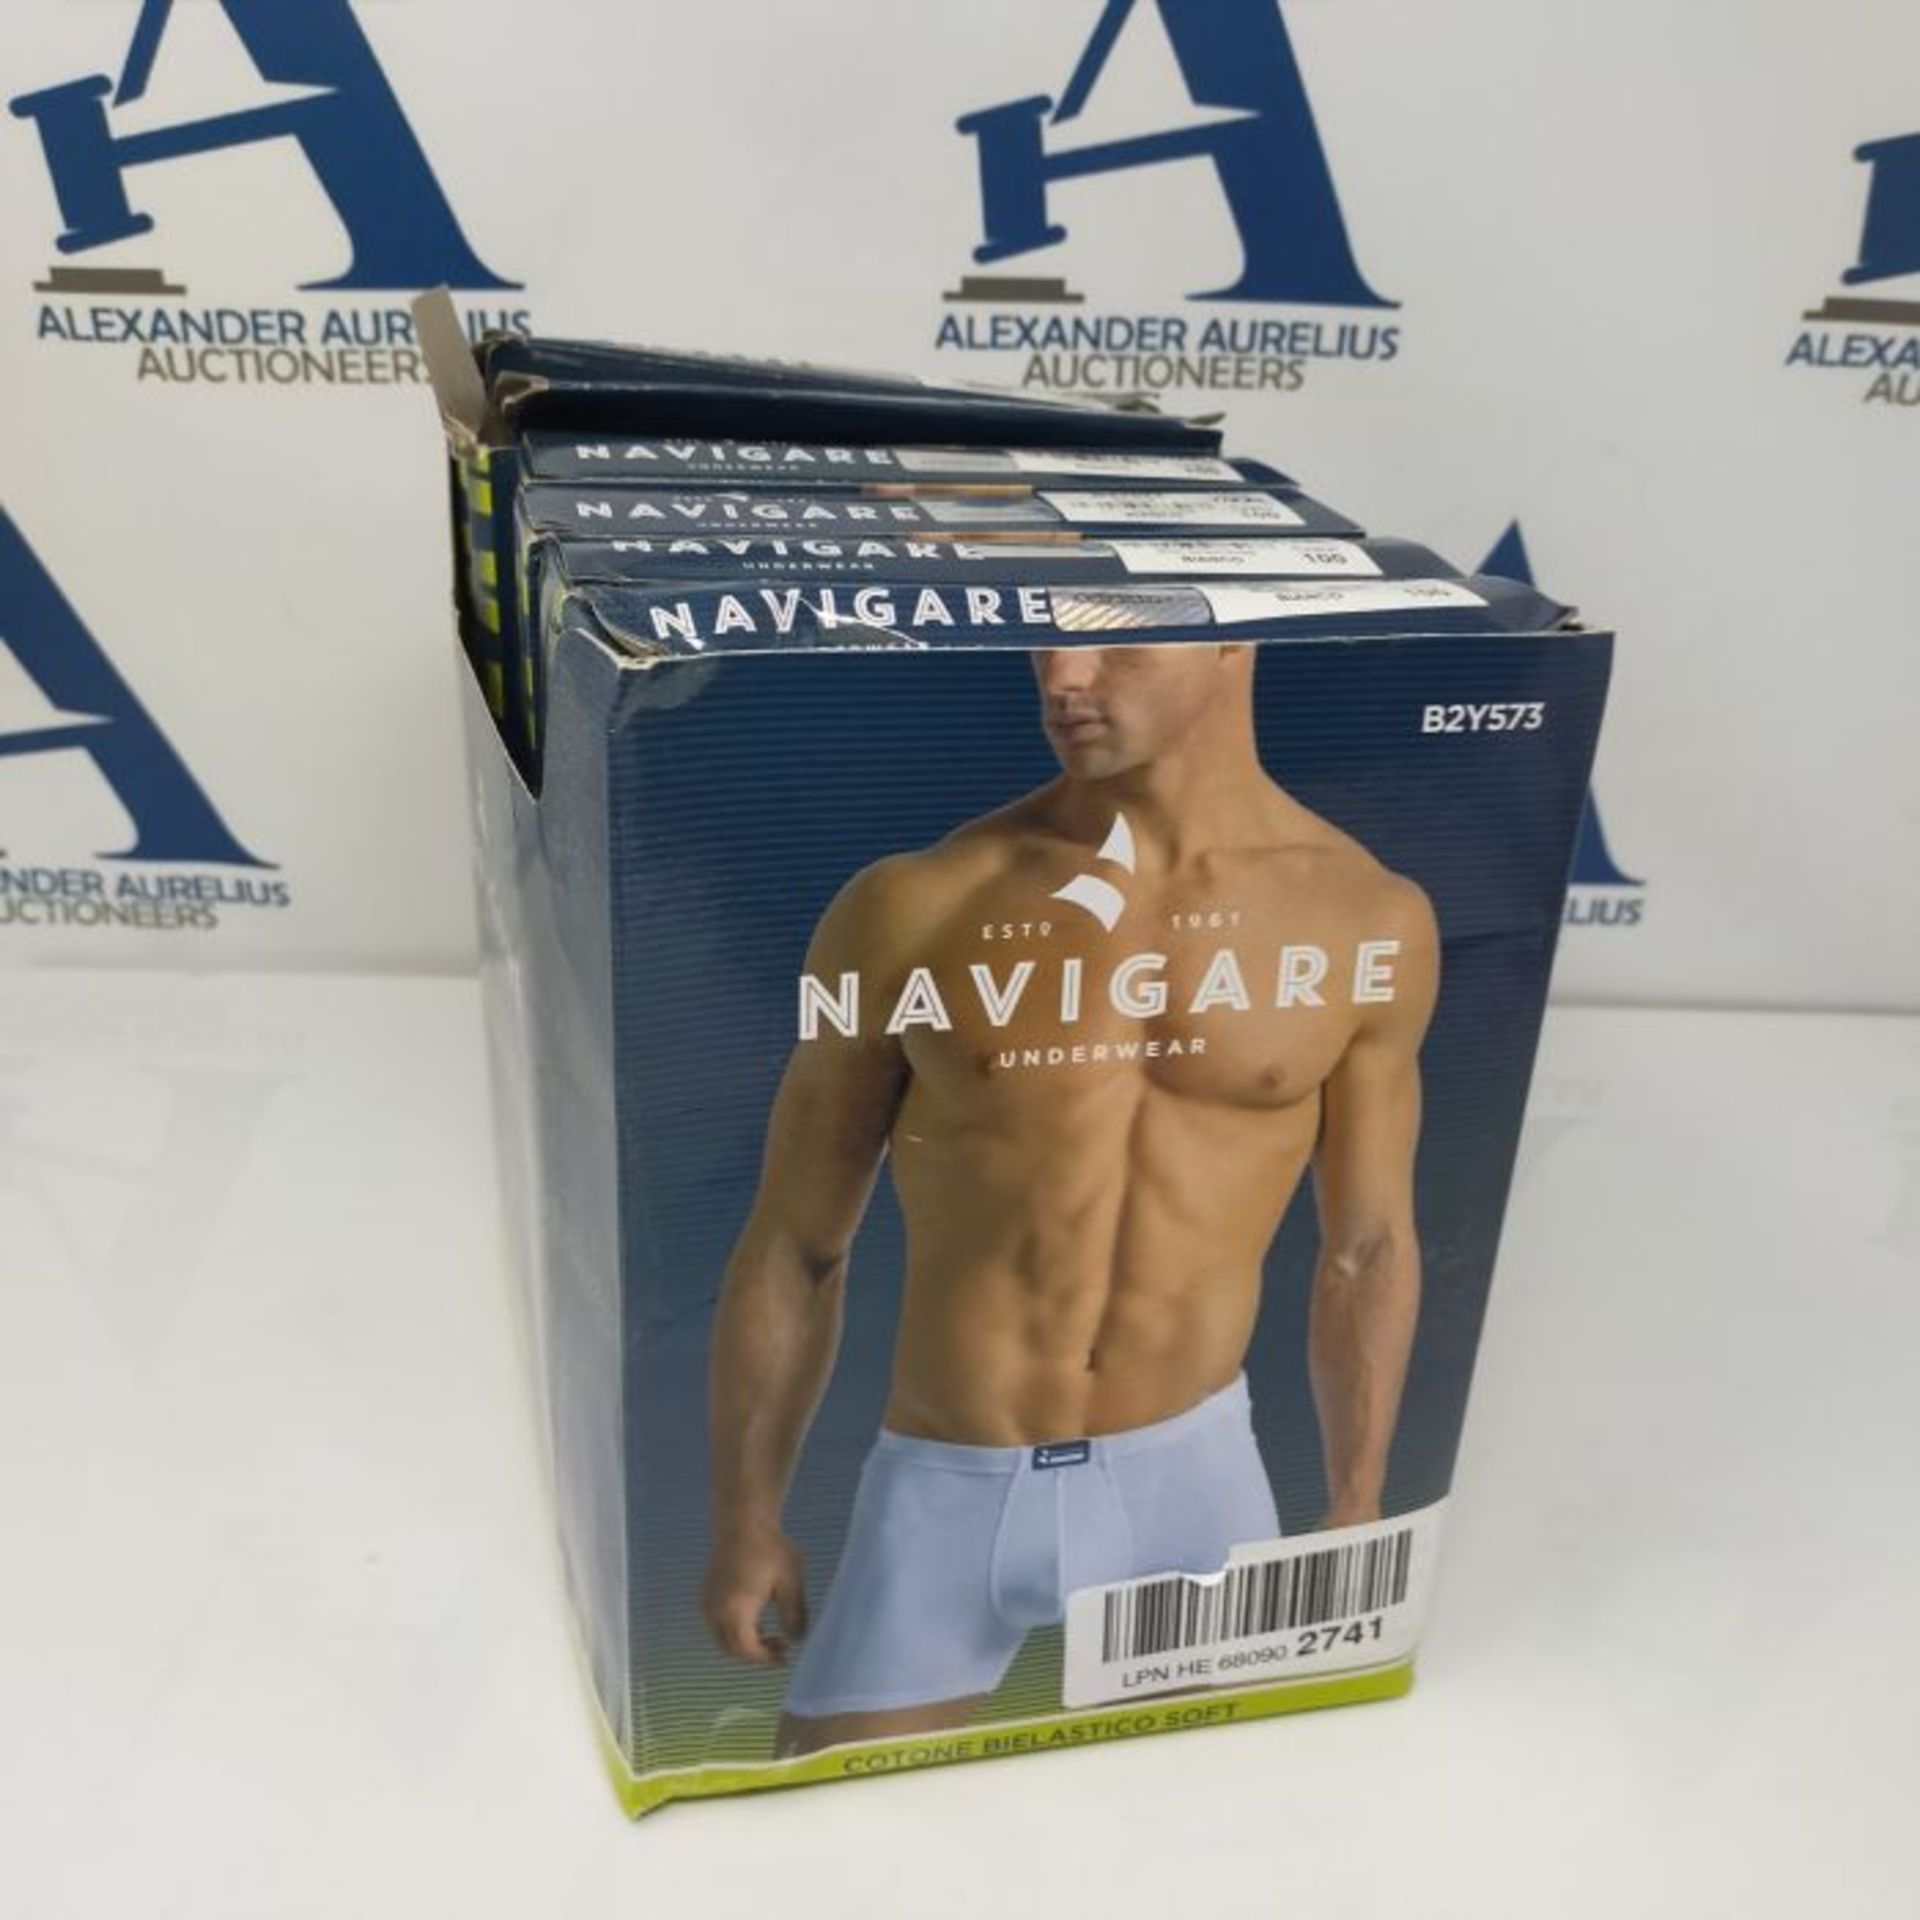 Navigare Men's 573 Boxer Briefs (Pack of 6), White, XX-Large - Image 2 of 2